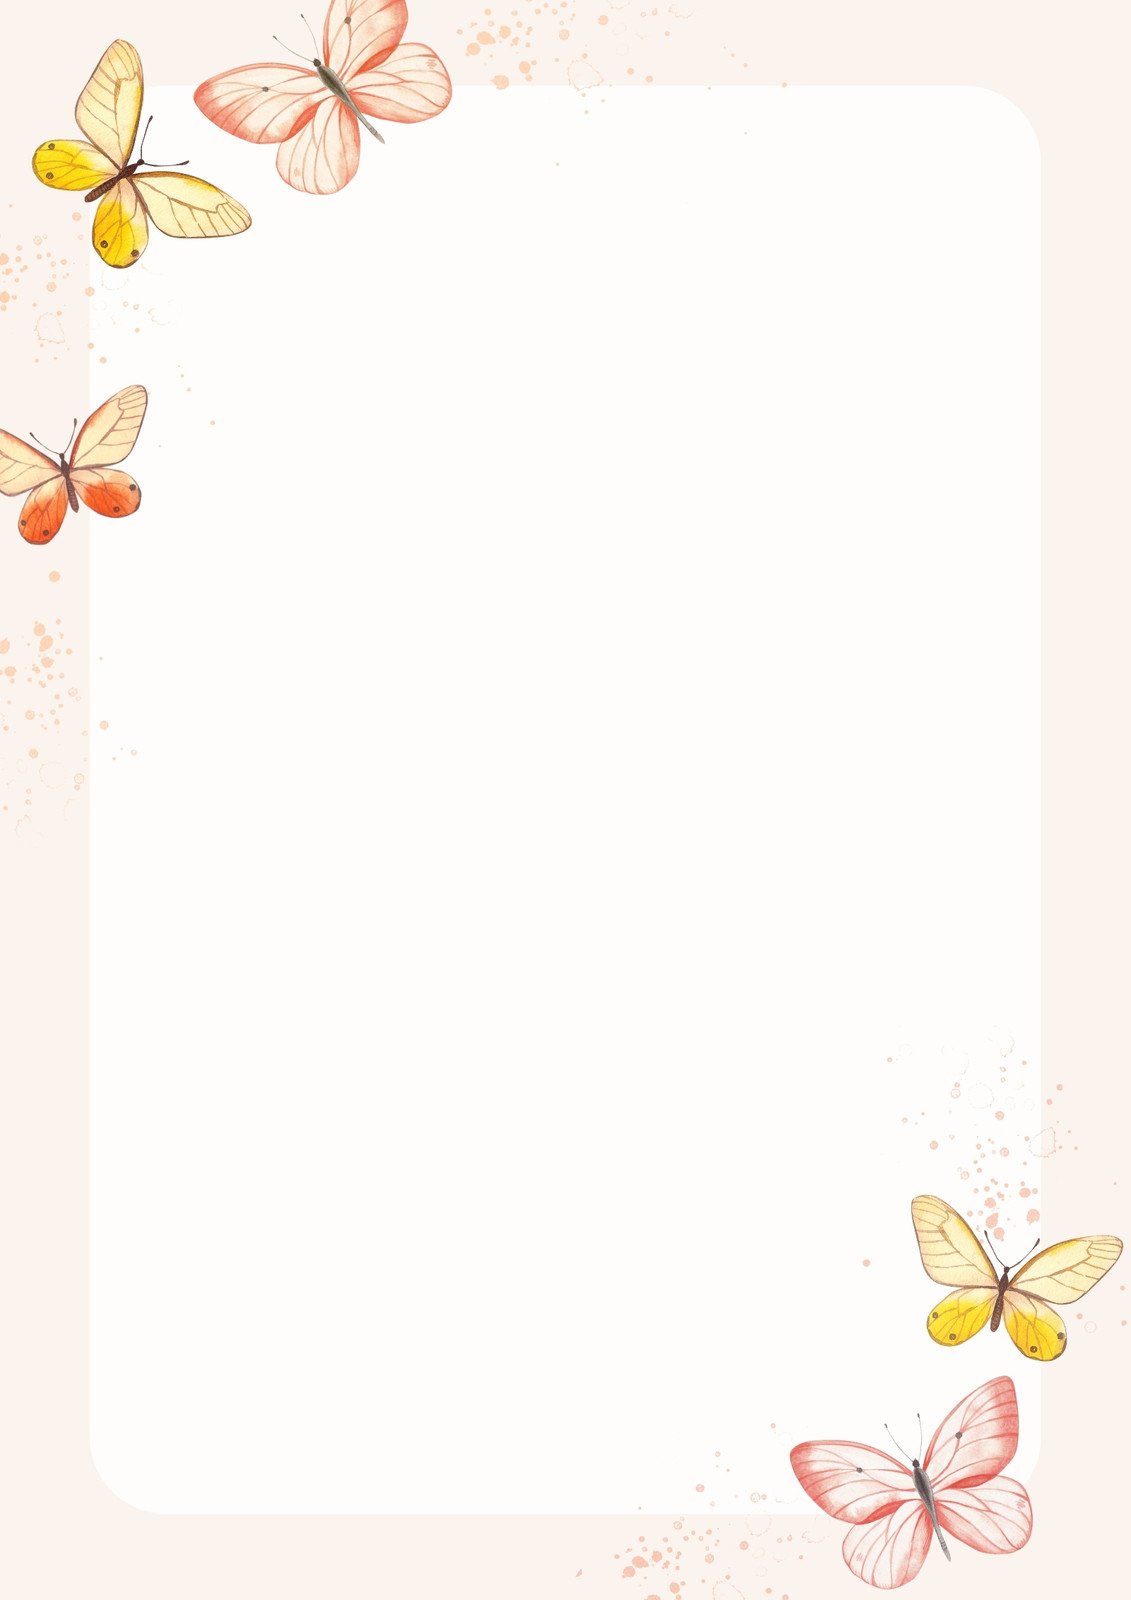 Butterfly Freedom Sticker - Butterfly Freedom Pretty - Discover & Share GIFs